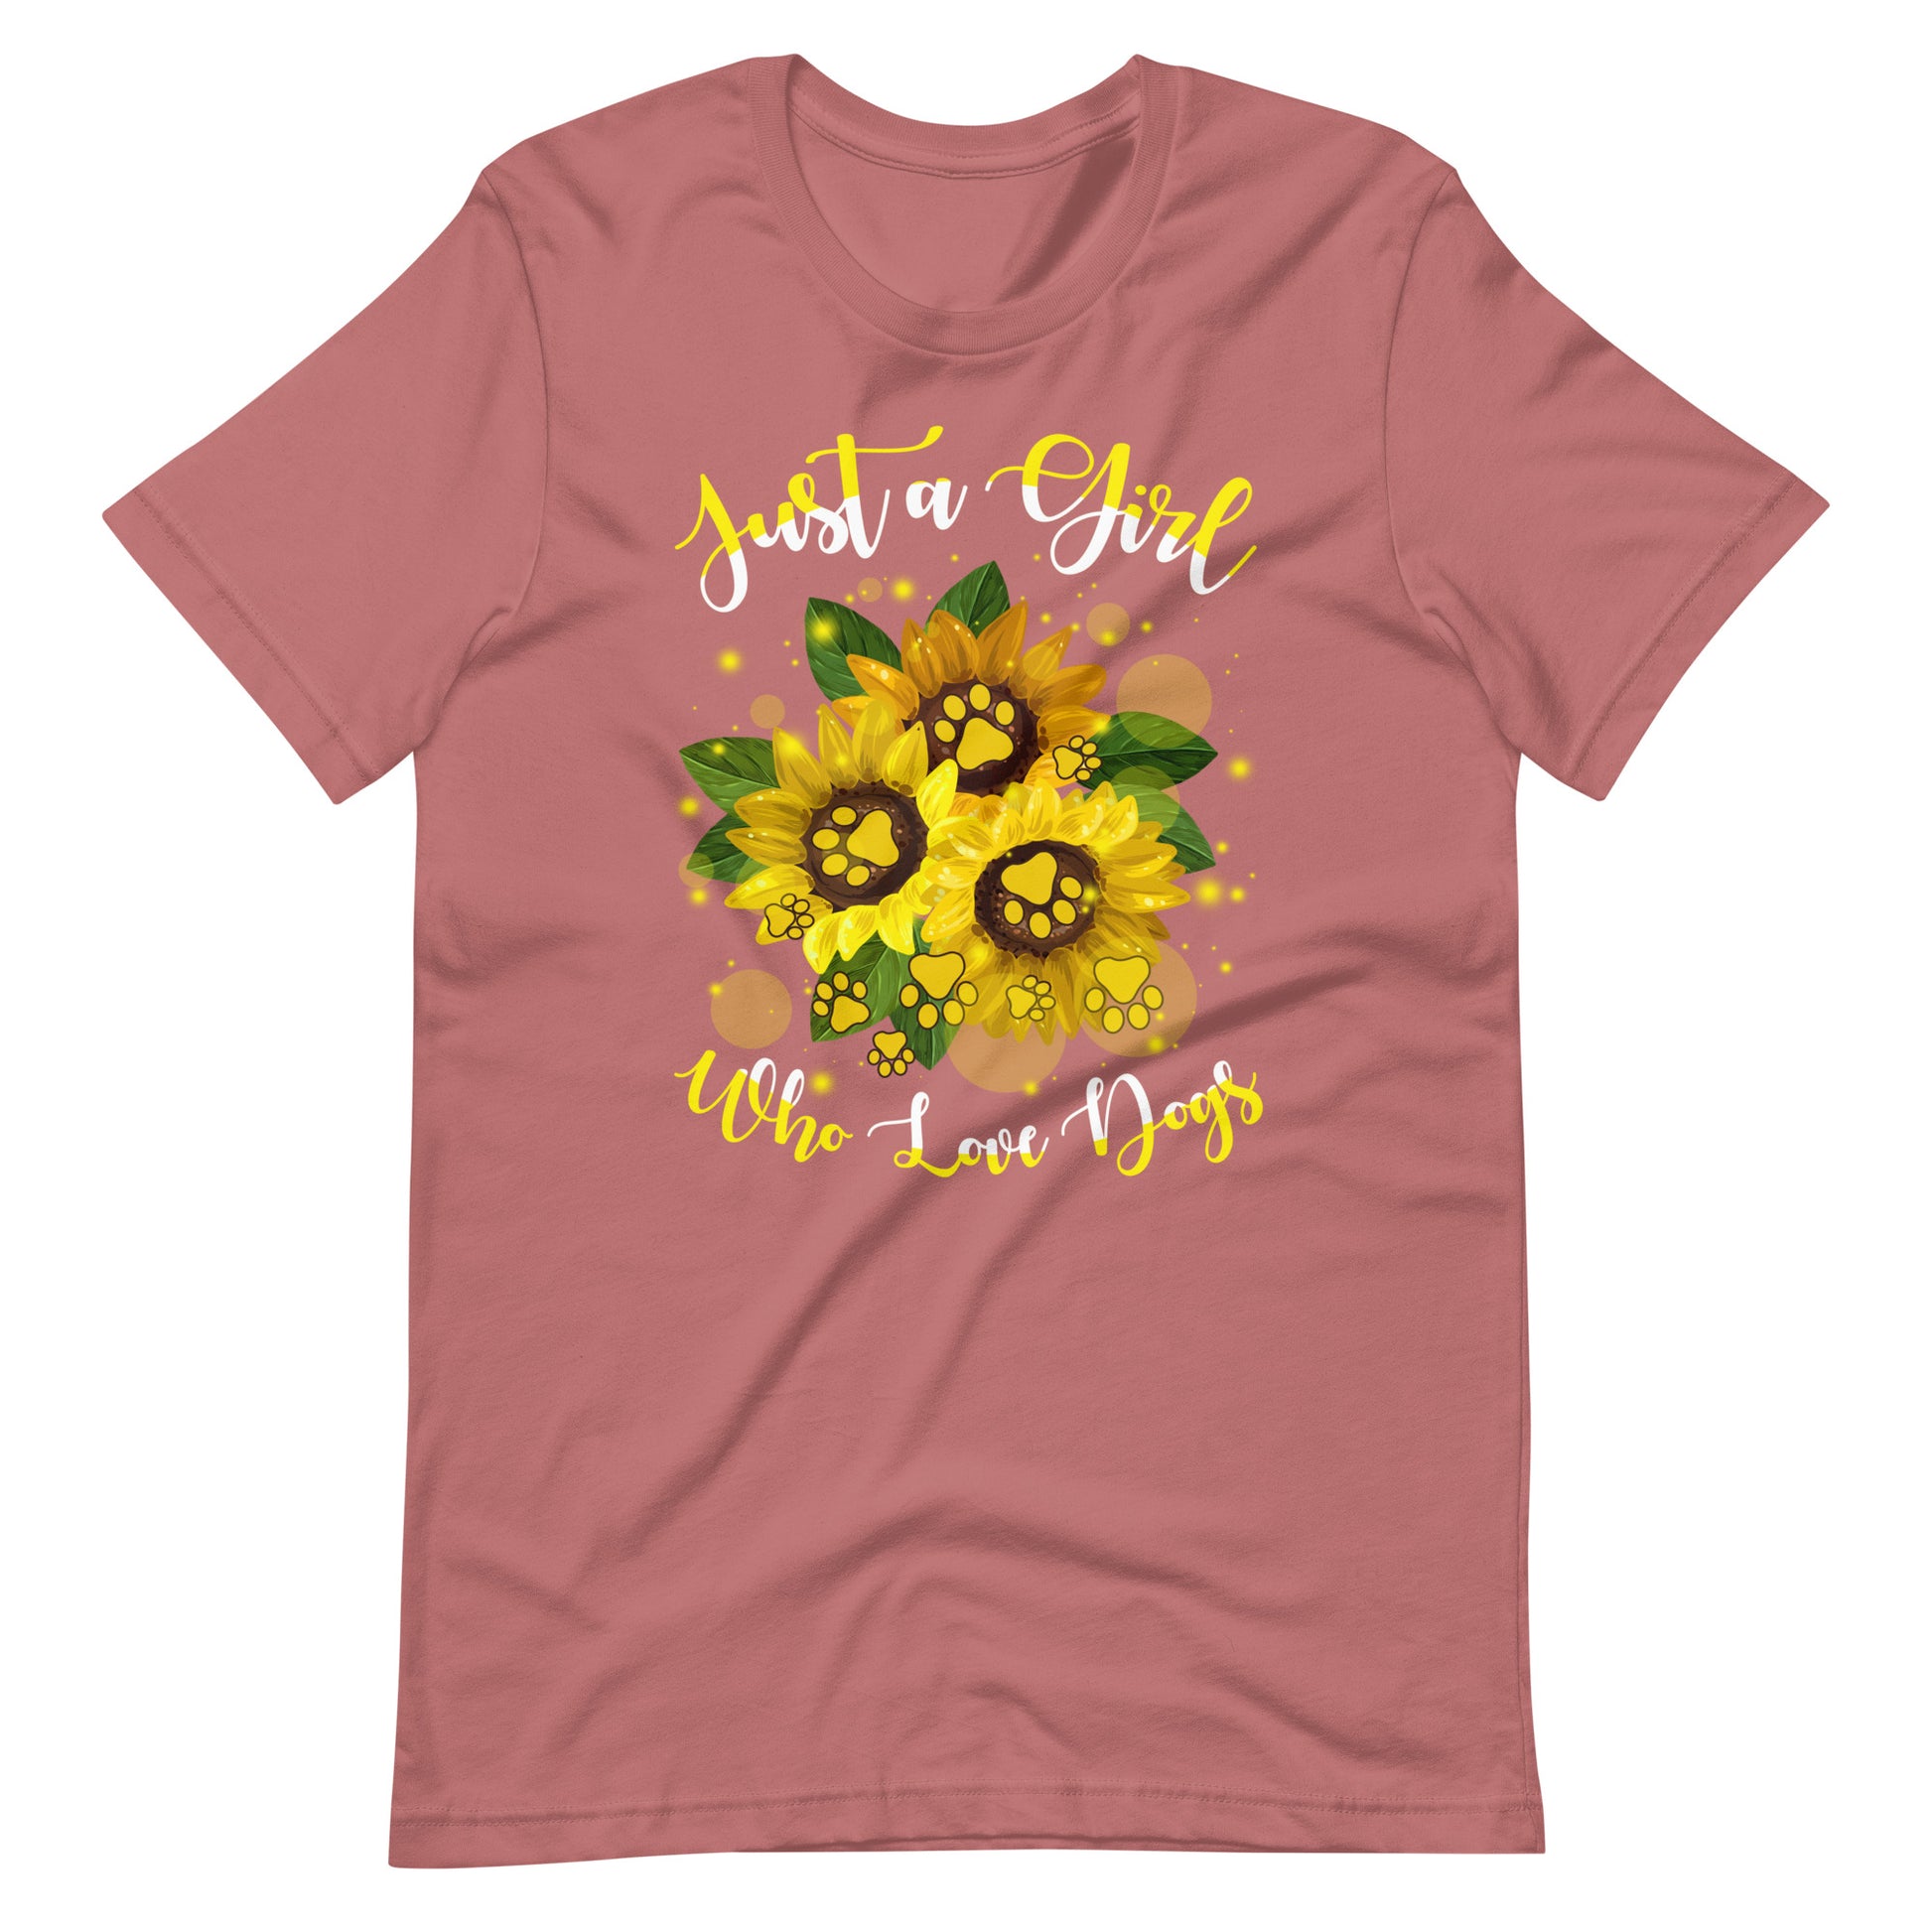 Just a Girl Who Loves Dogs T-Shirt